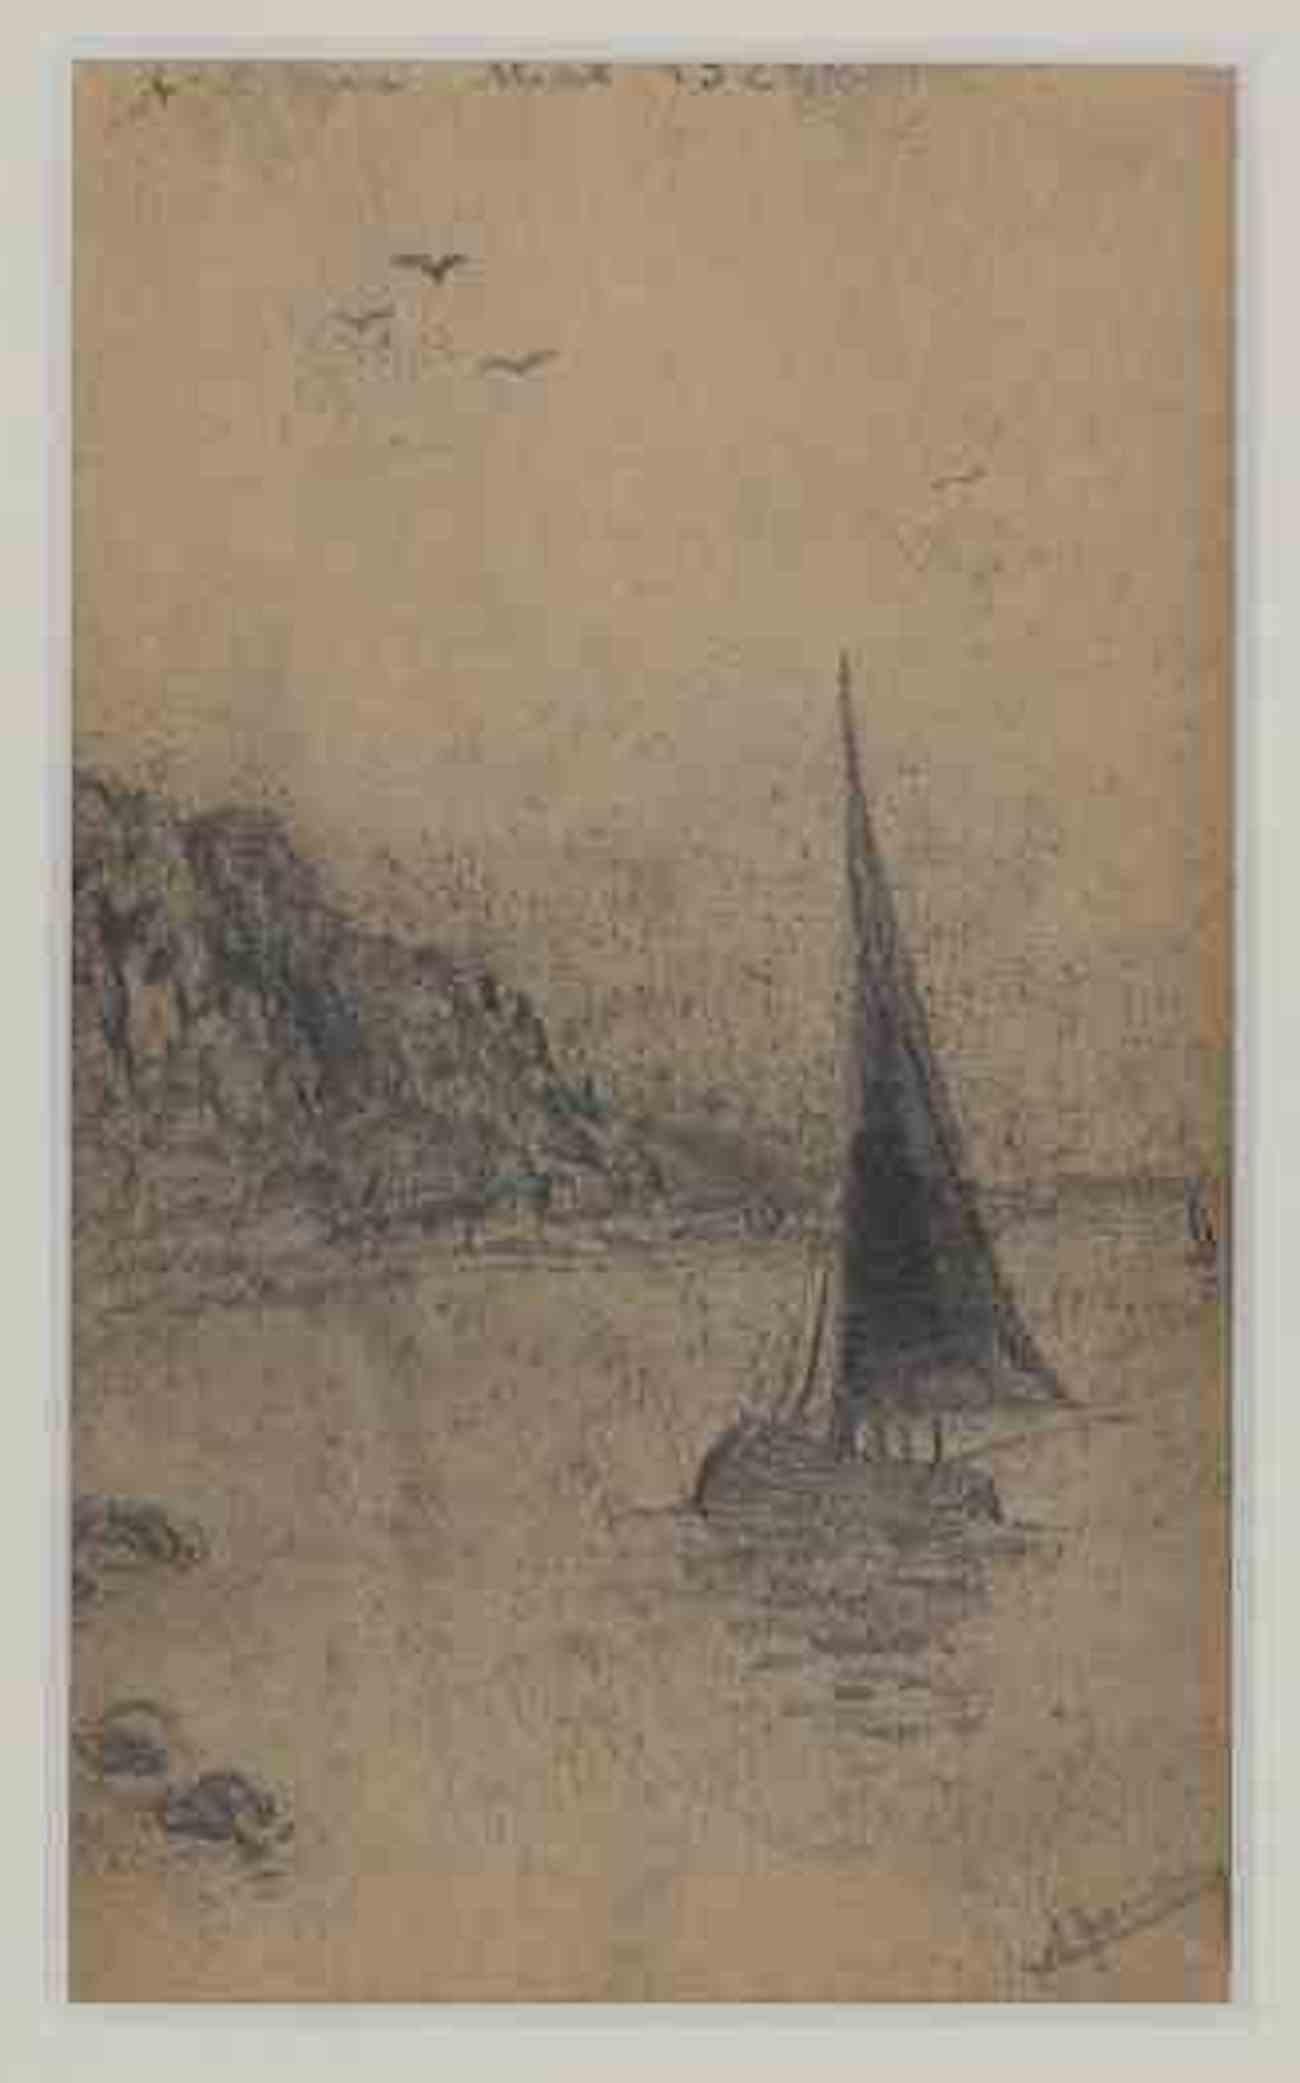 Unknown Landscape Art - Sail Boat - Original Drawing - mid-20th Century